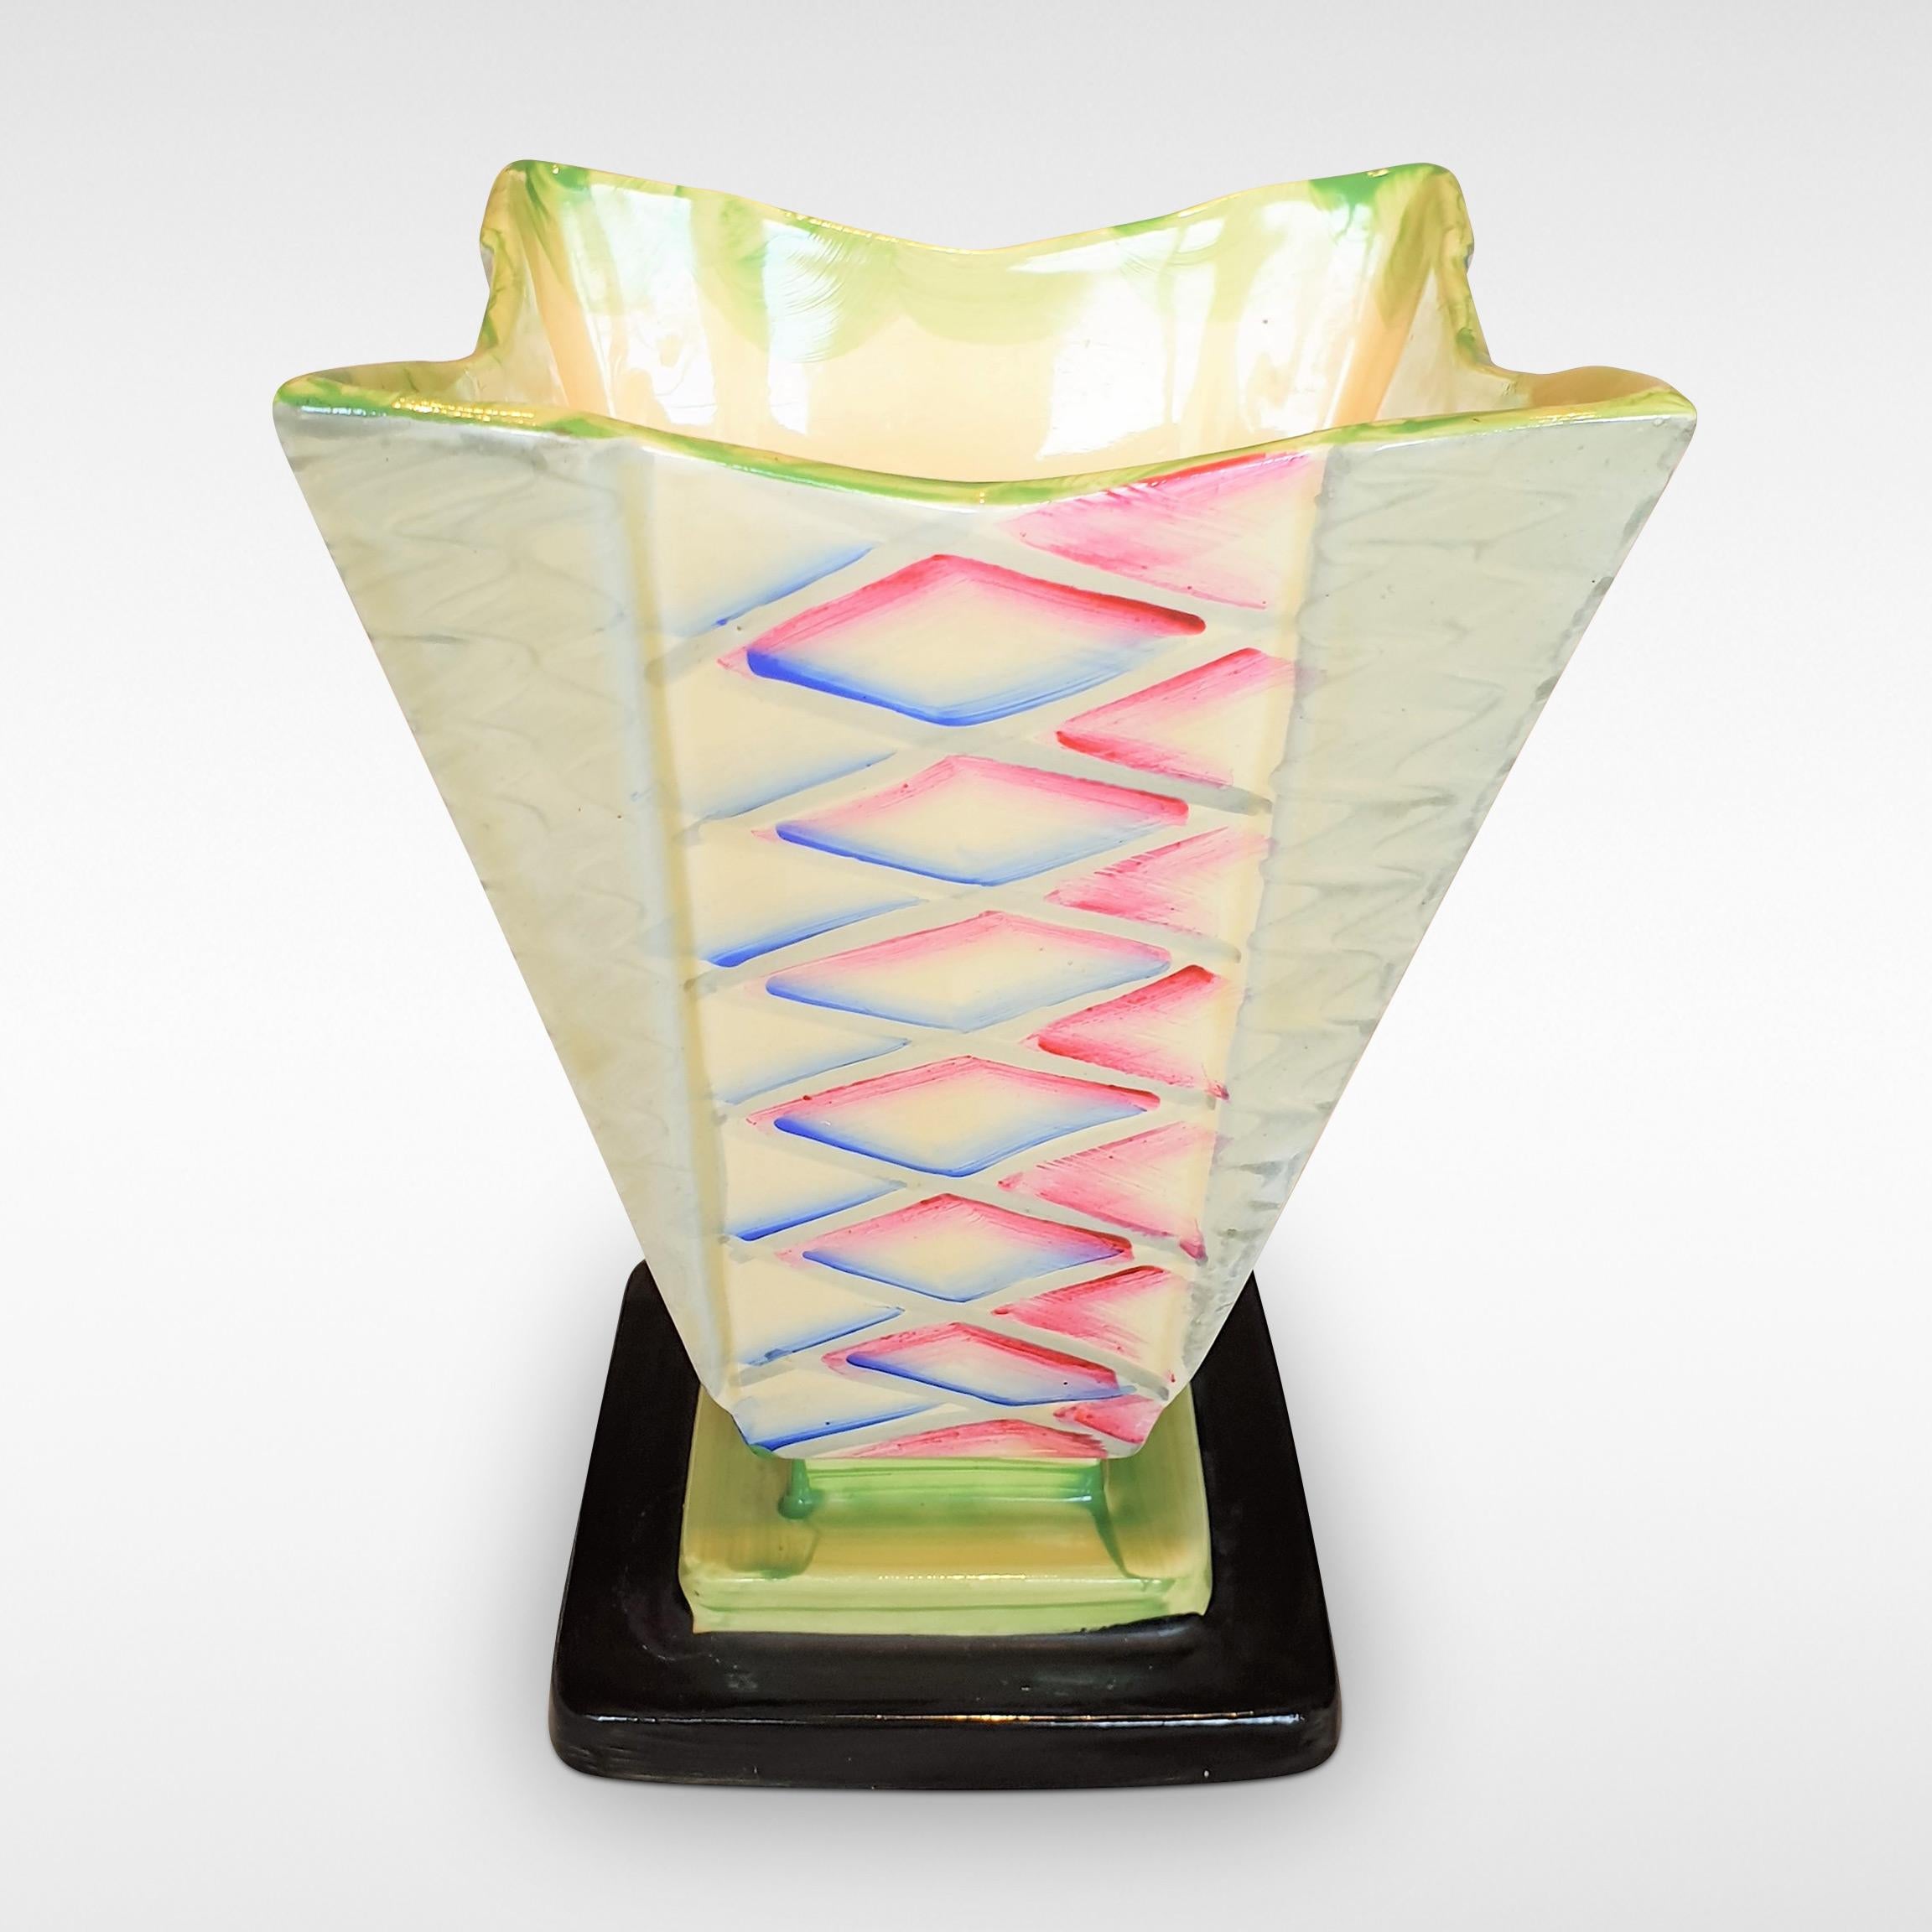 A stunning pattern in zingy colors on a dramatic shape, this Art Deco square vase from circa 1935 by Myott Son & Co is complete with the original 'frog' to assist flower arrangement.